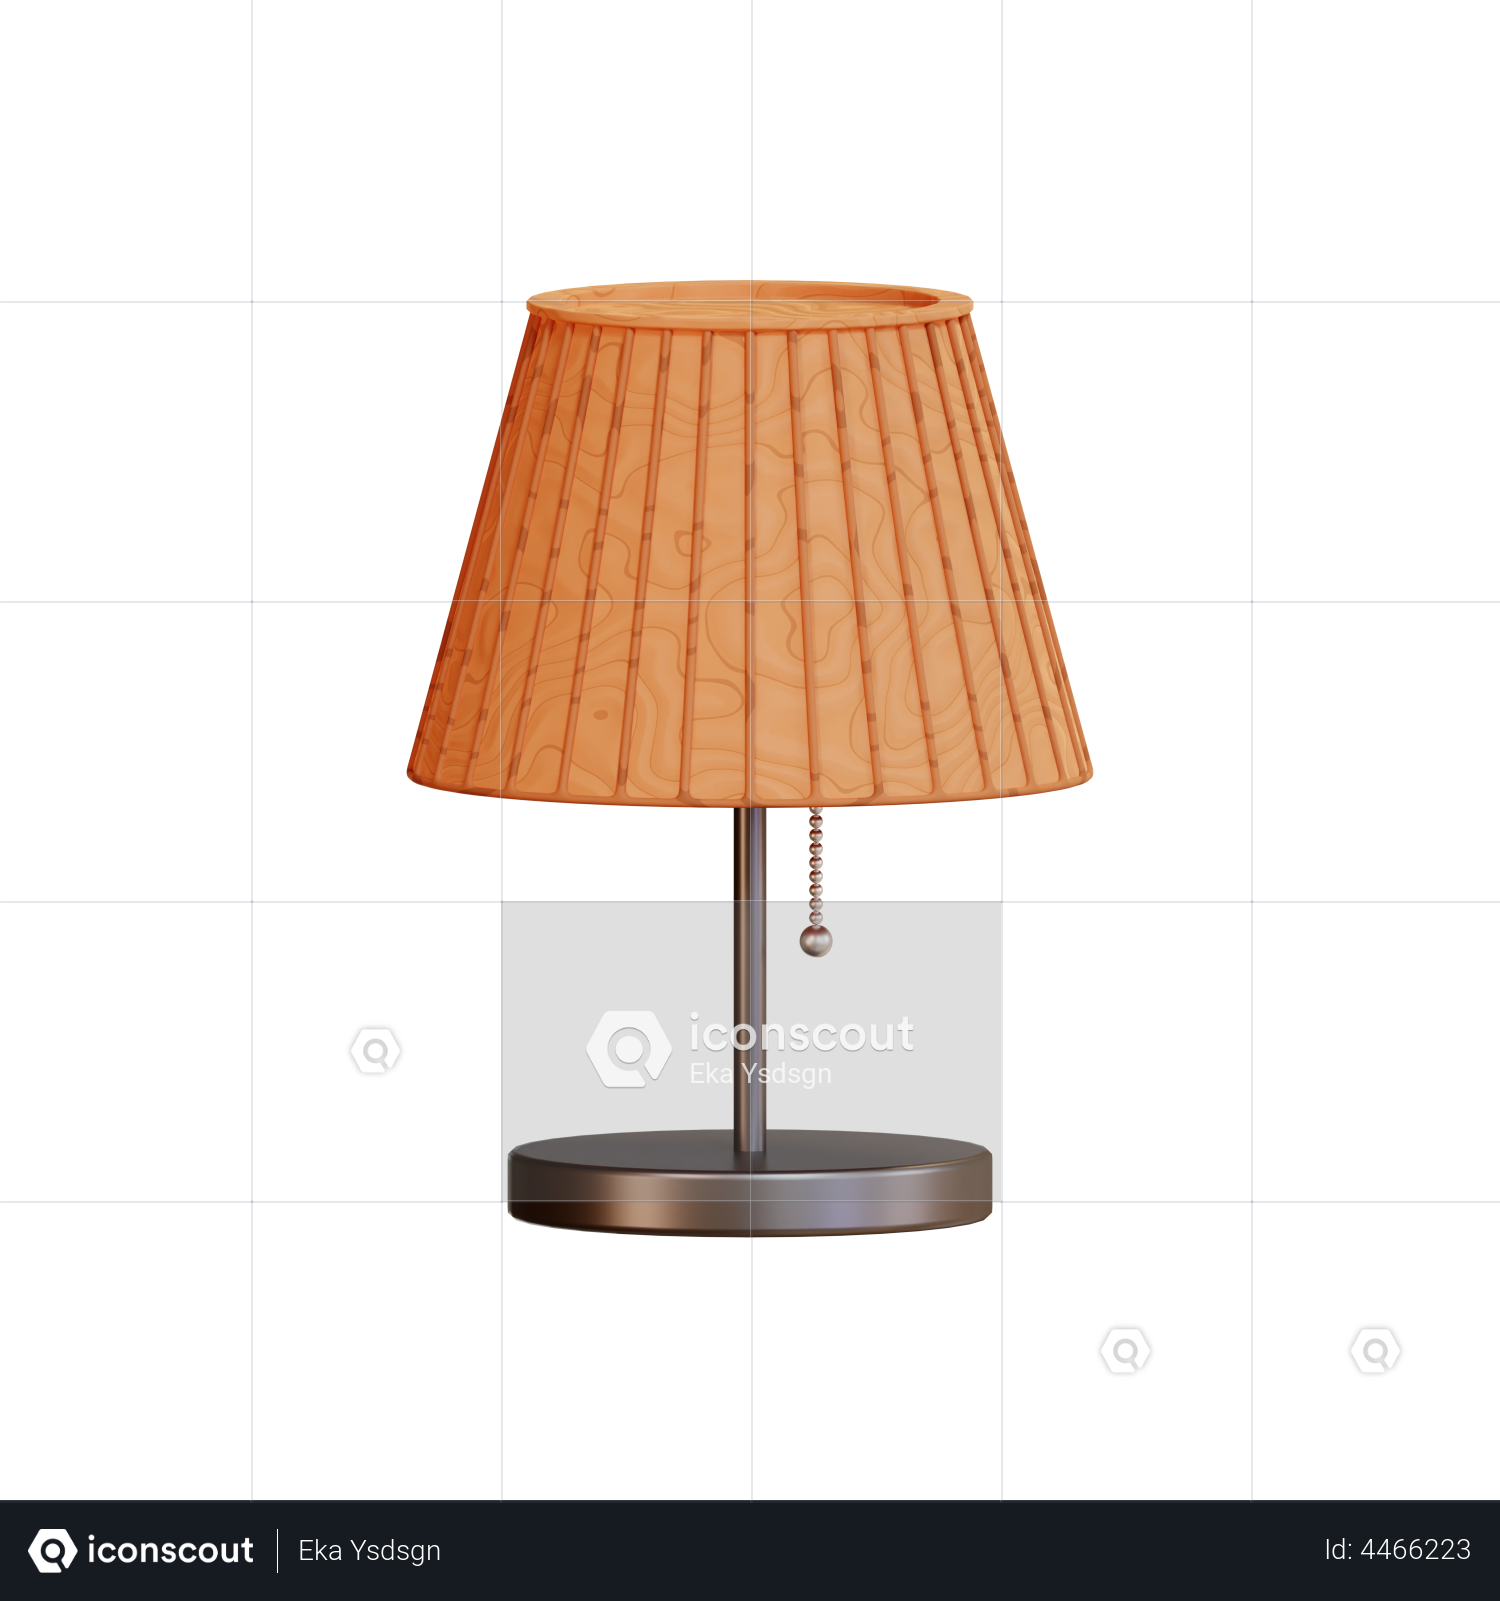 4 types of table lamp drawing in dwg file.